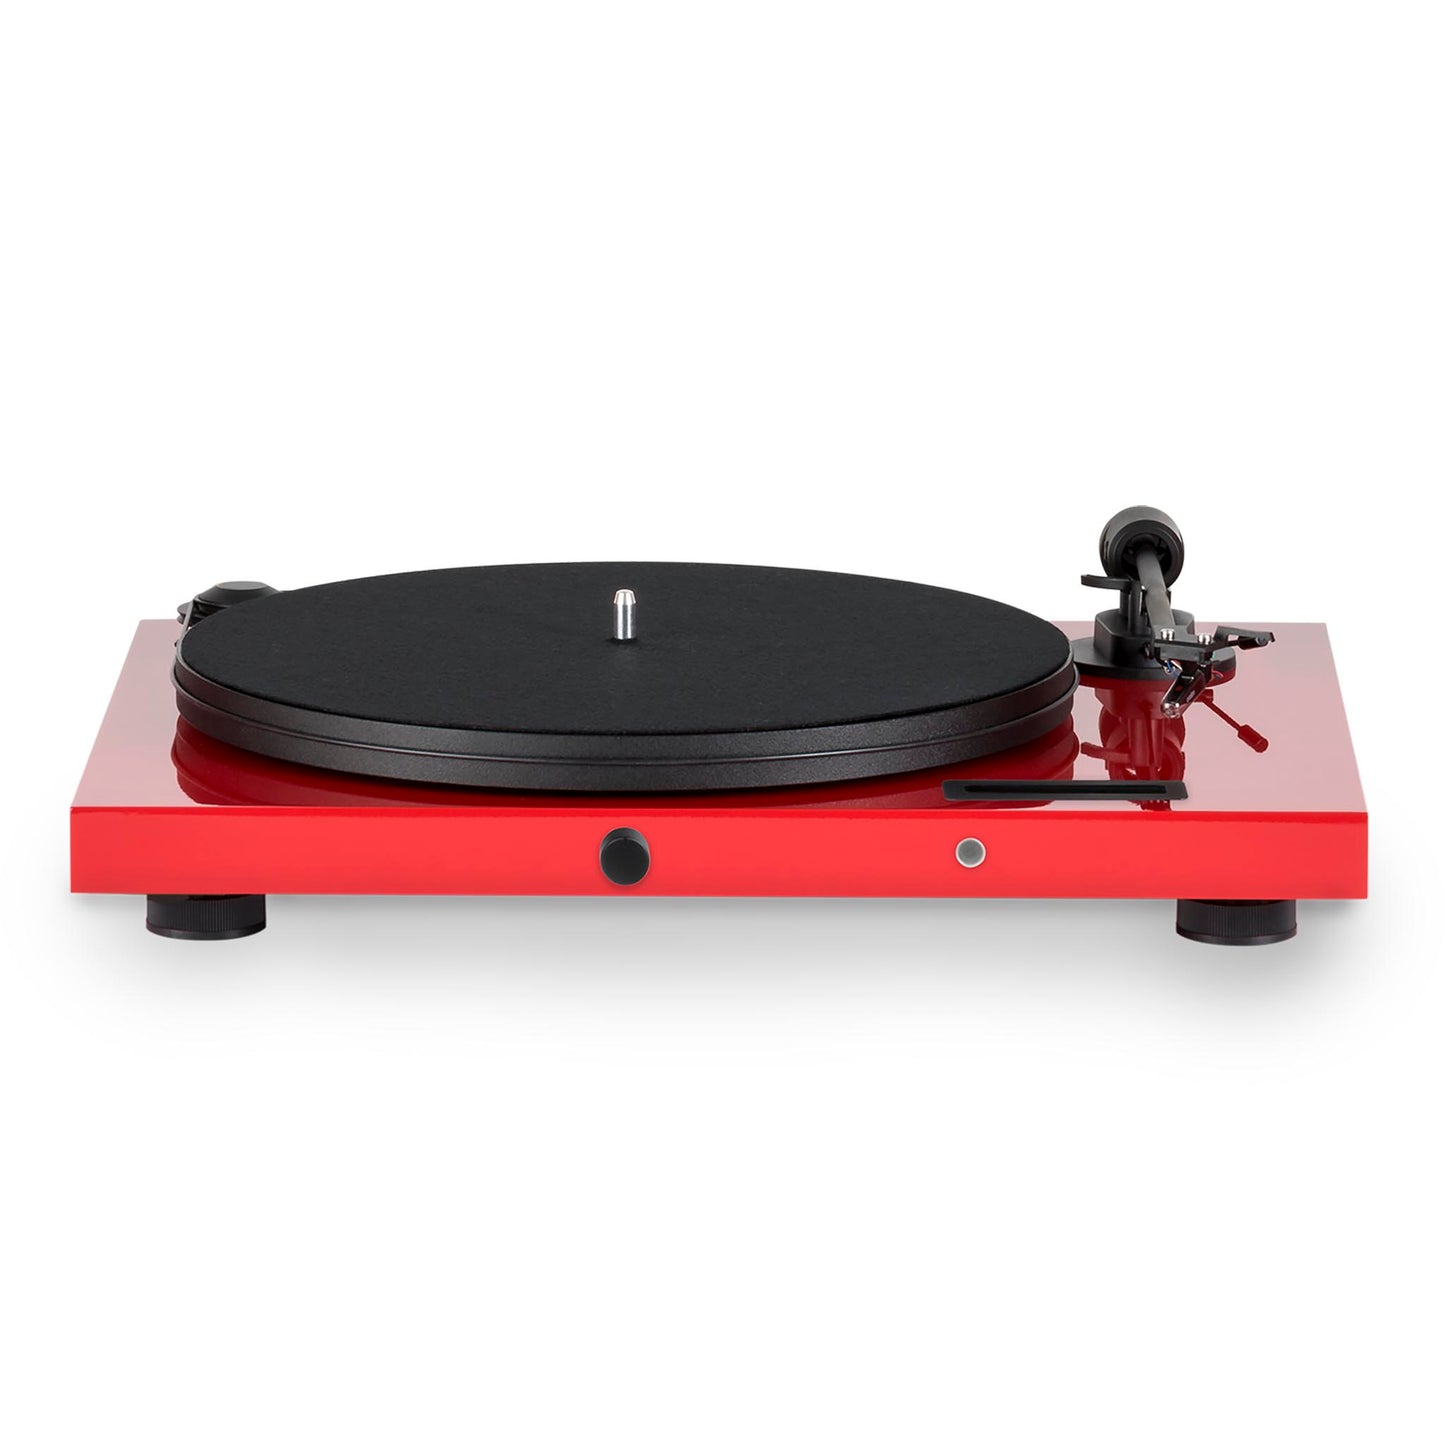 Pro-Ject JukeBox E "All-in-one" Turntable System